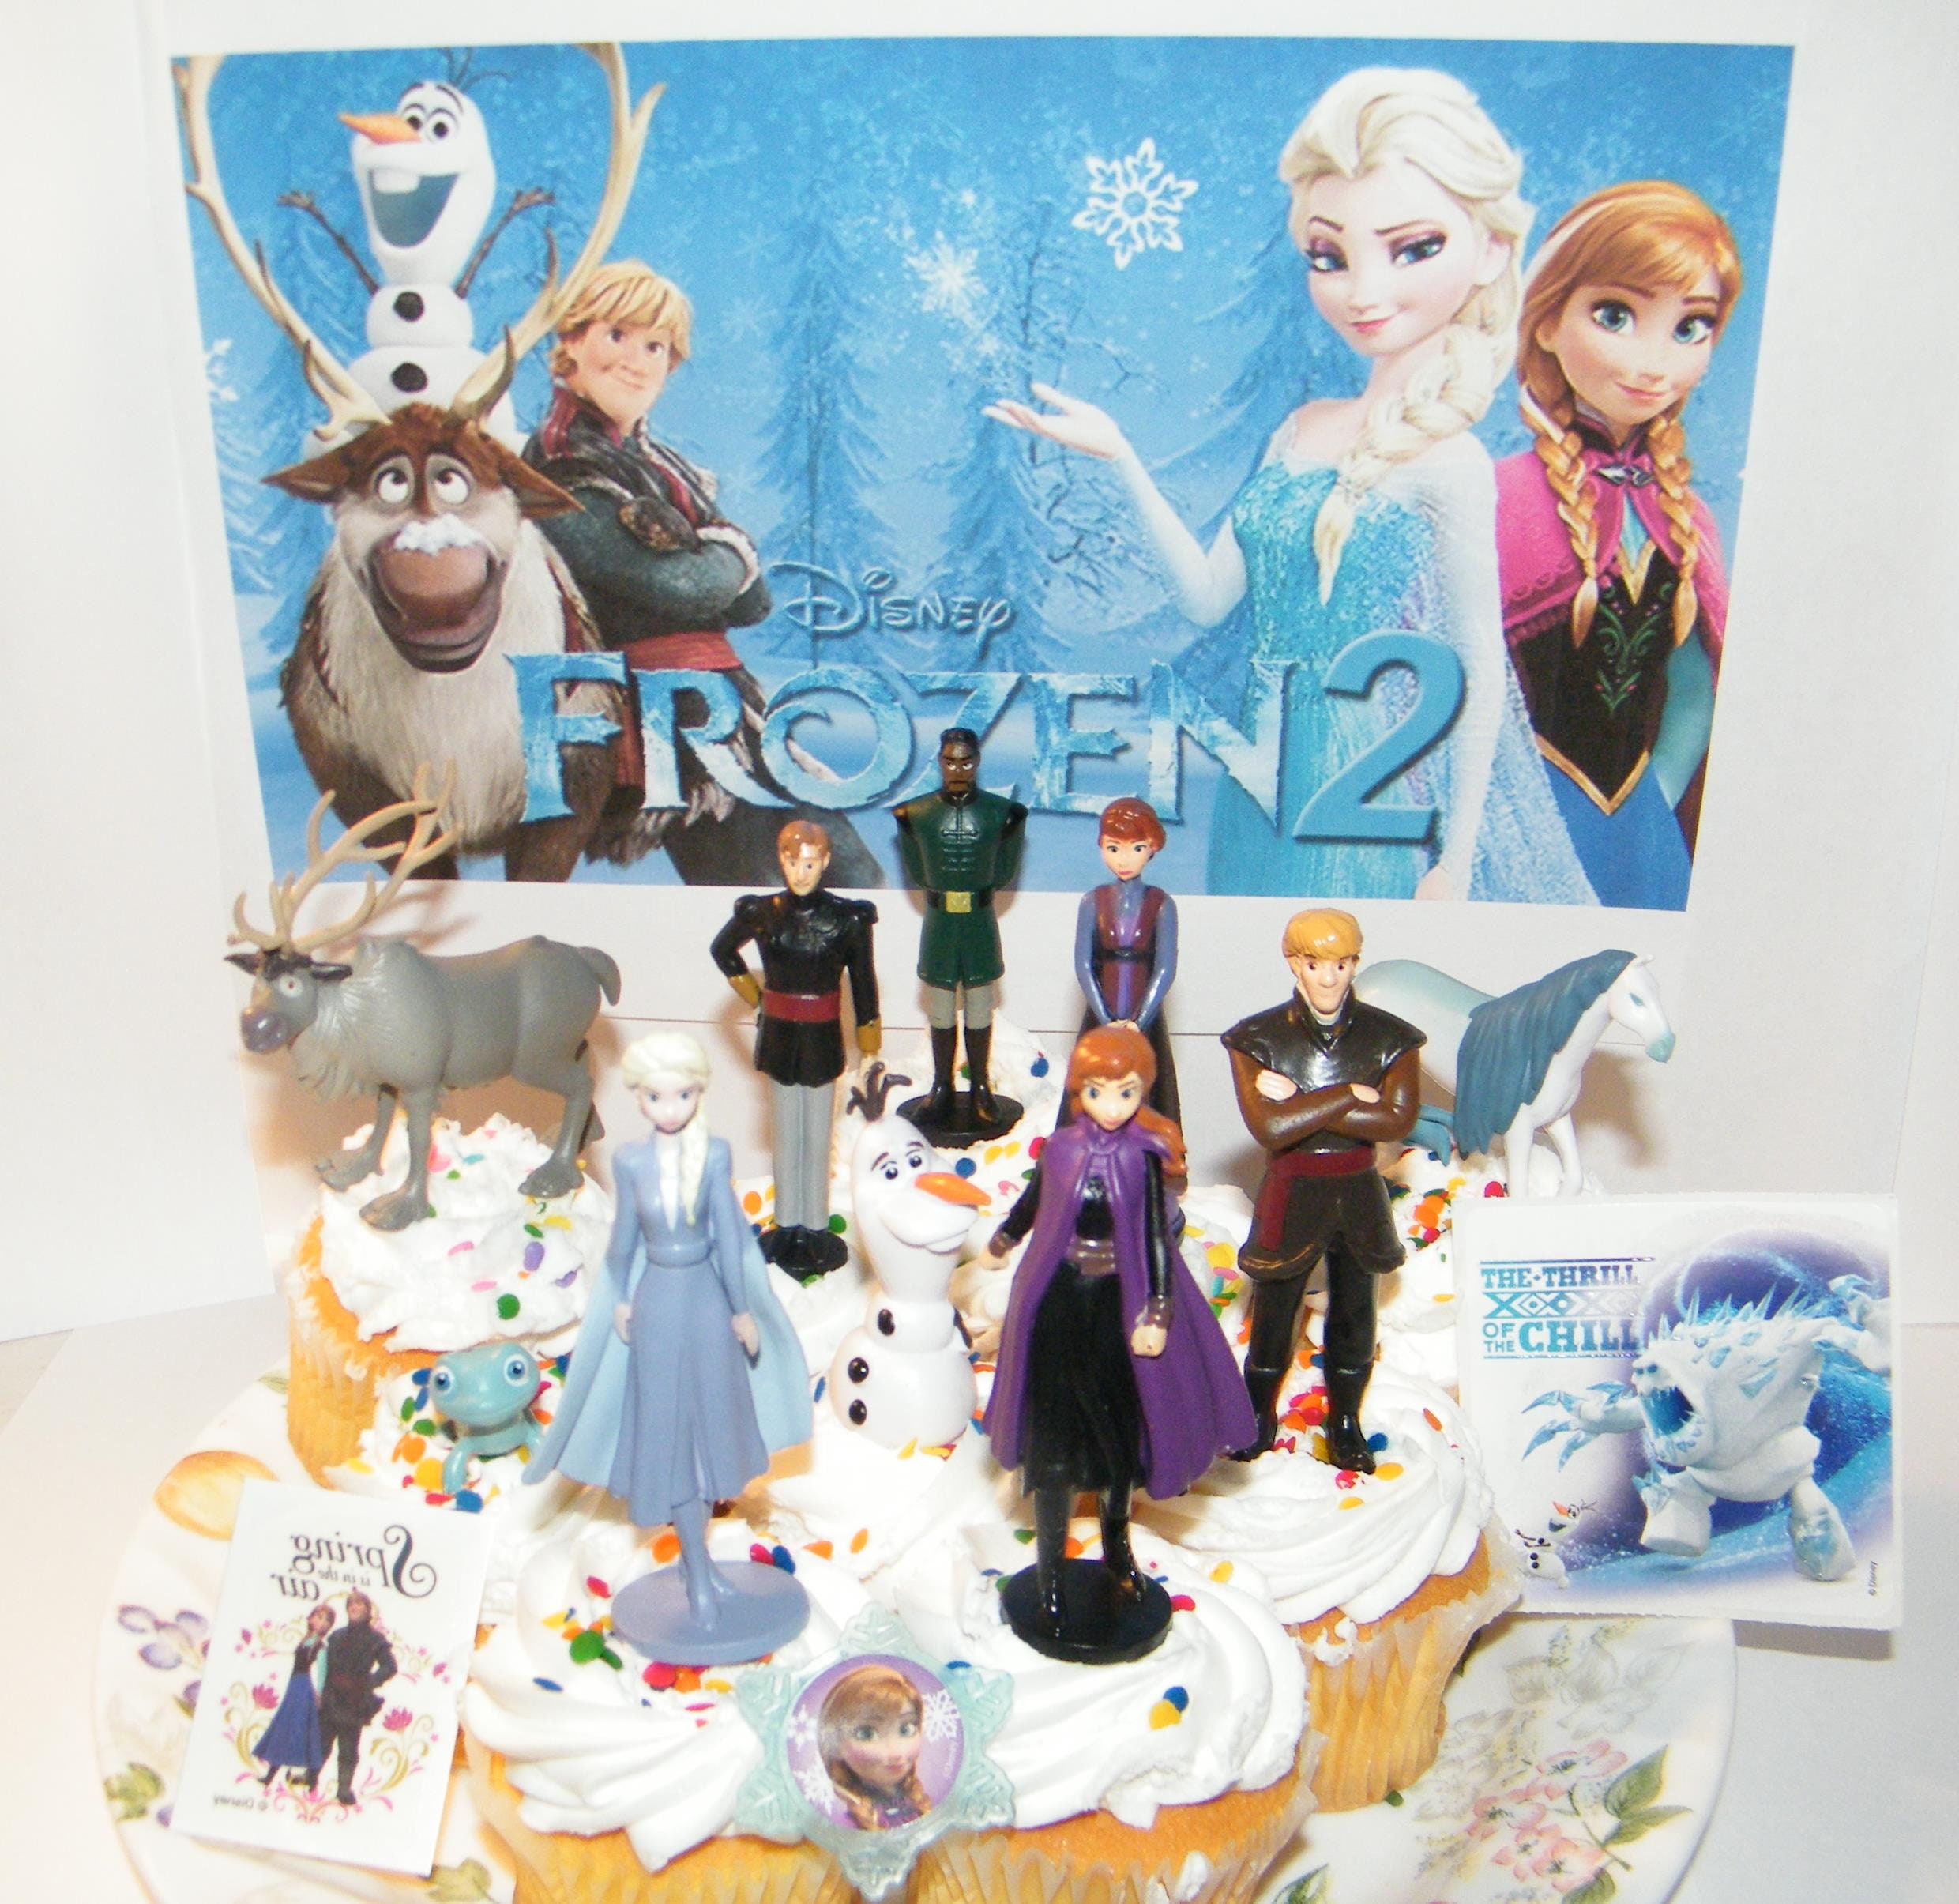 Tattoo Ring Disney Frozen 2 Movie Party Favors Set of 13 with 10 Fun Figures 